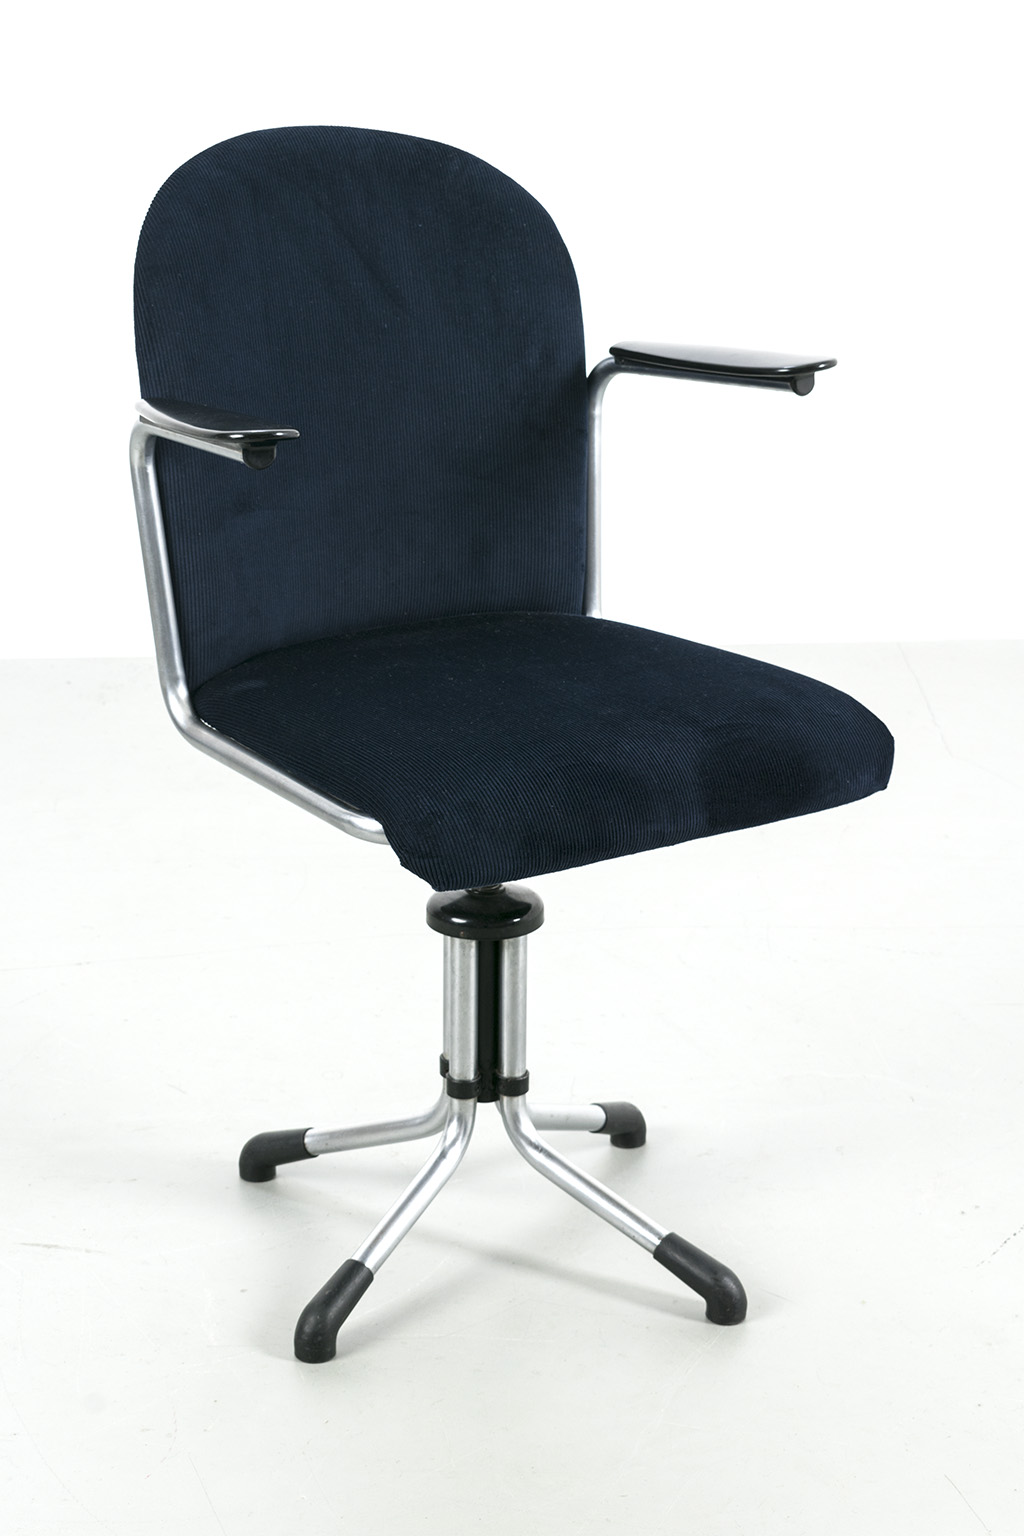 Gispen 356 desk chair with new upholstery